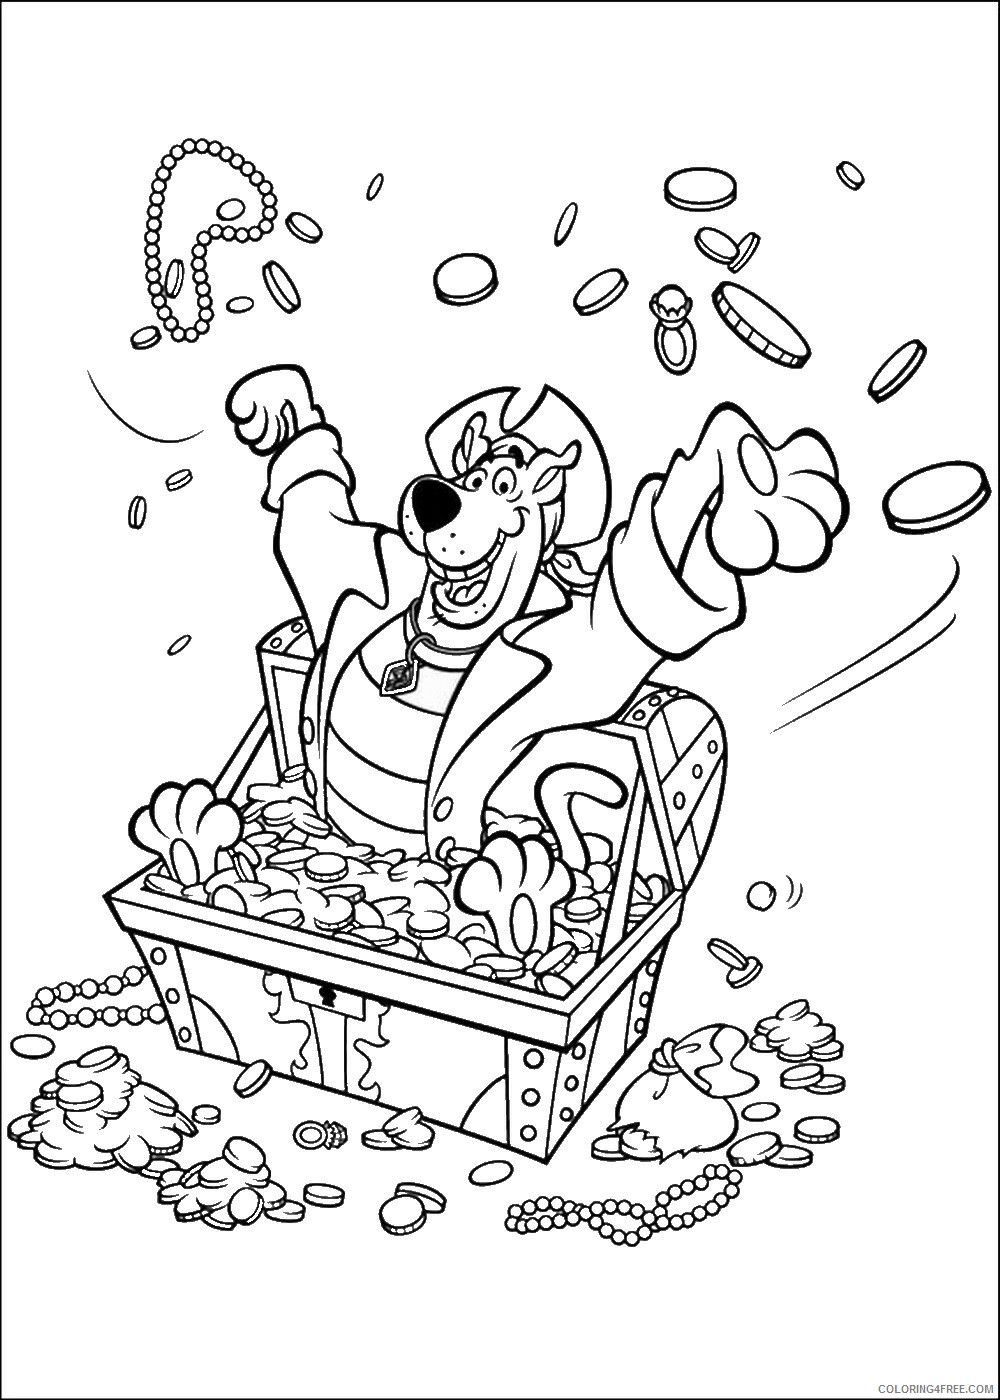 Scooby Doo Coloring Pages TV Film scooby_doo_cl_23 Printable 2020 07270 Coloring4free